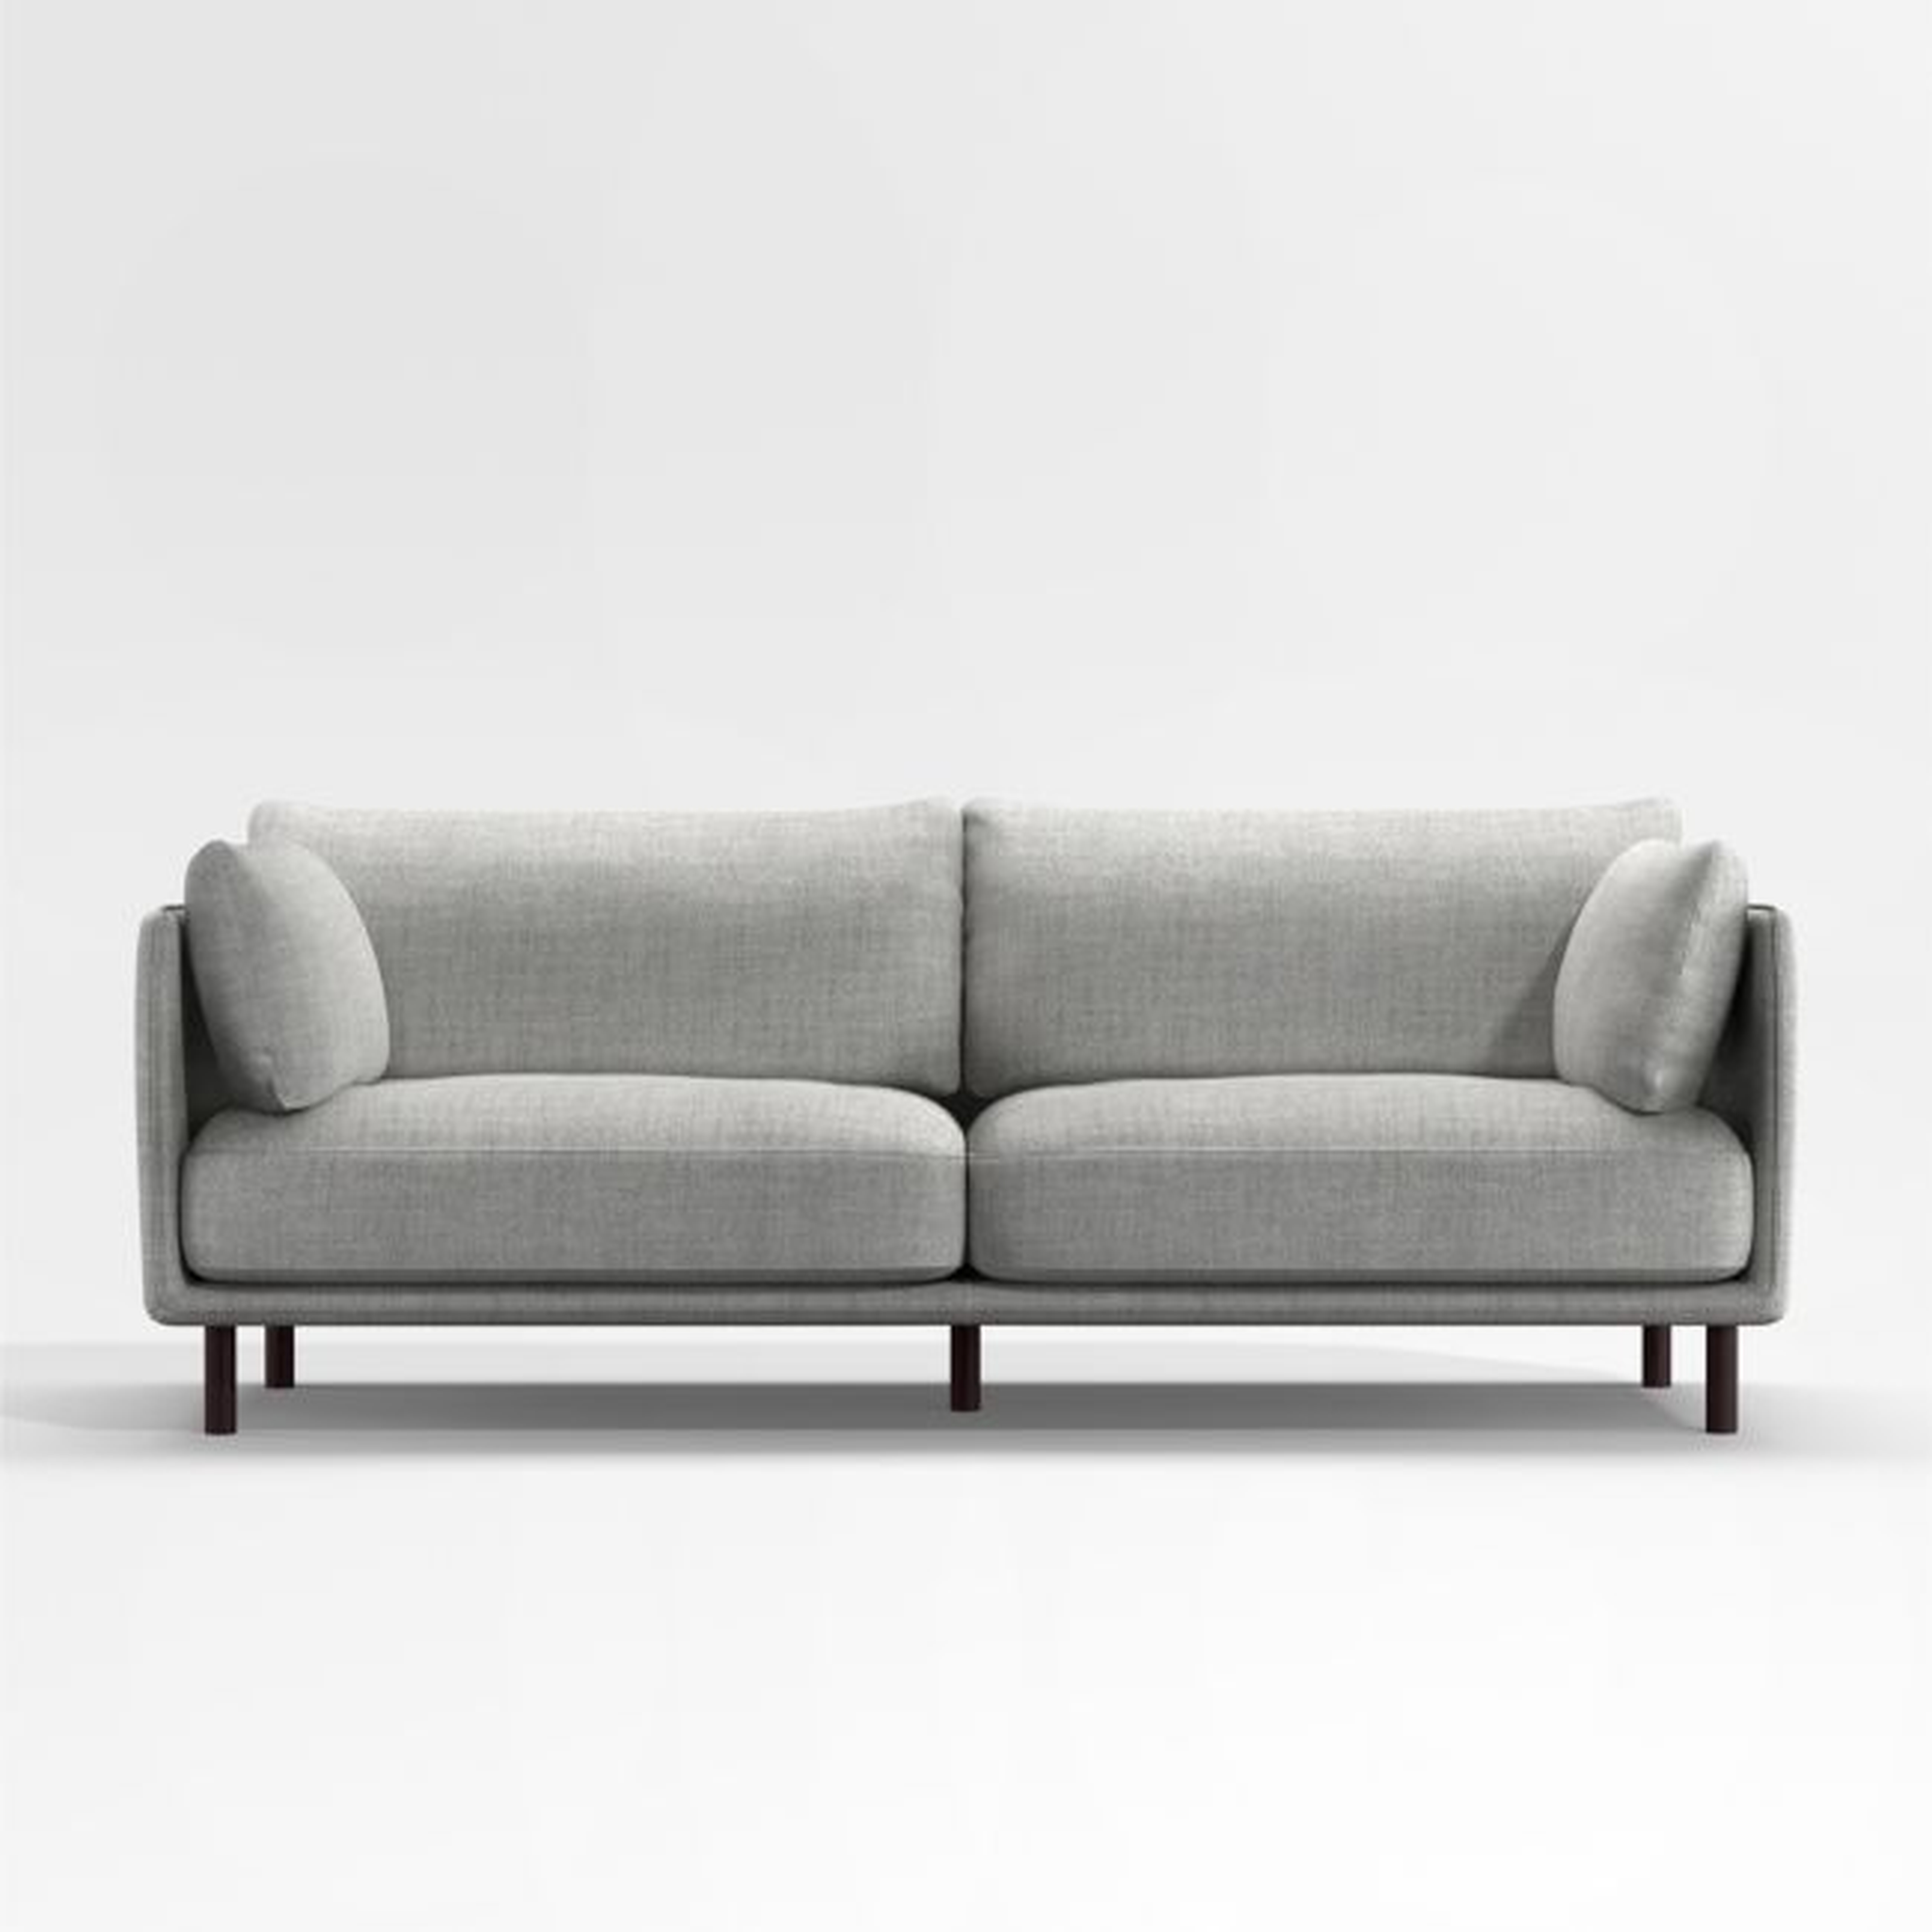 Wells Sofa with Dark Brown Leg Finish - Crate and Barrel